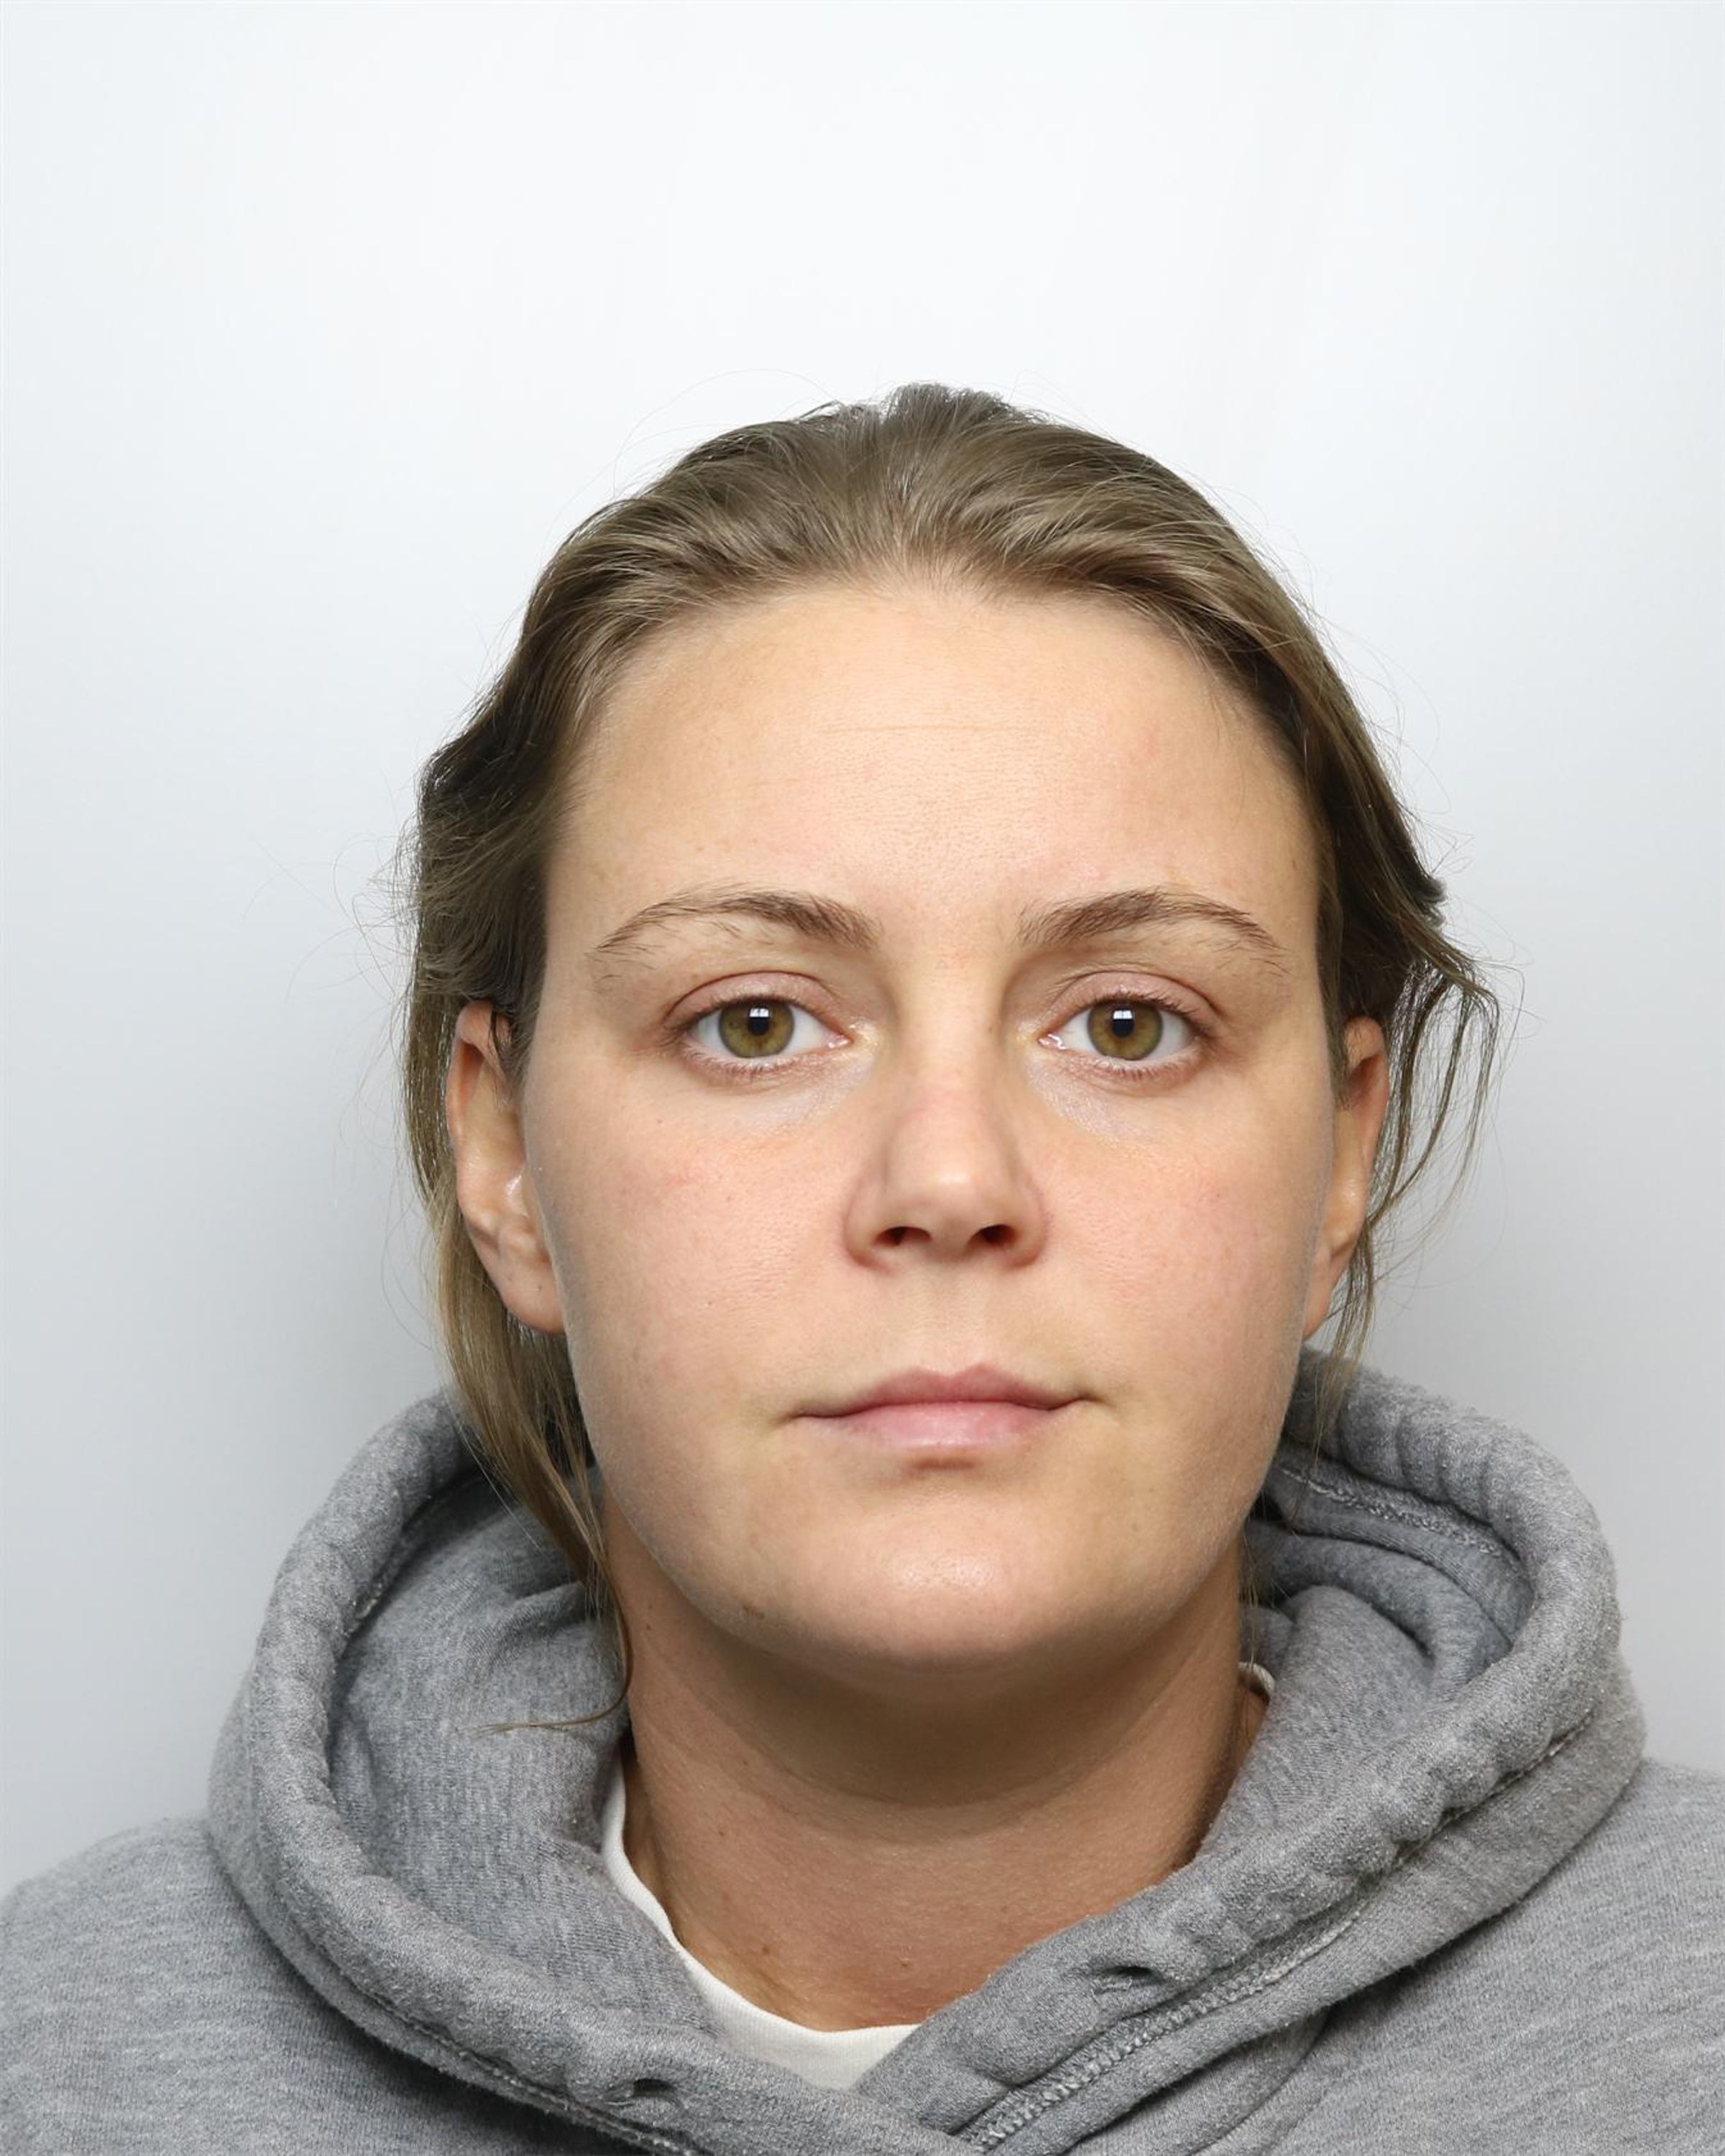 Savannah Brockhill was given a life sentence with a minimum term of 25 years for the murder of 16-month-old Star Hobson (West Yorkshire Police/PA)